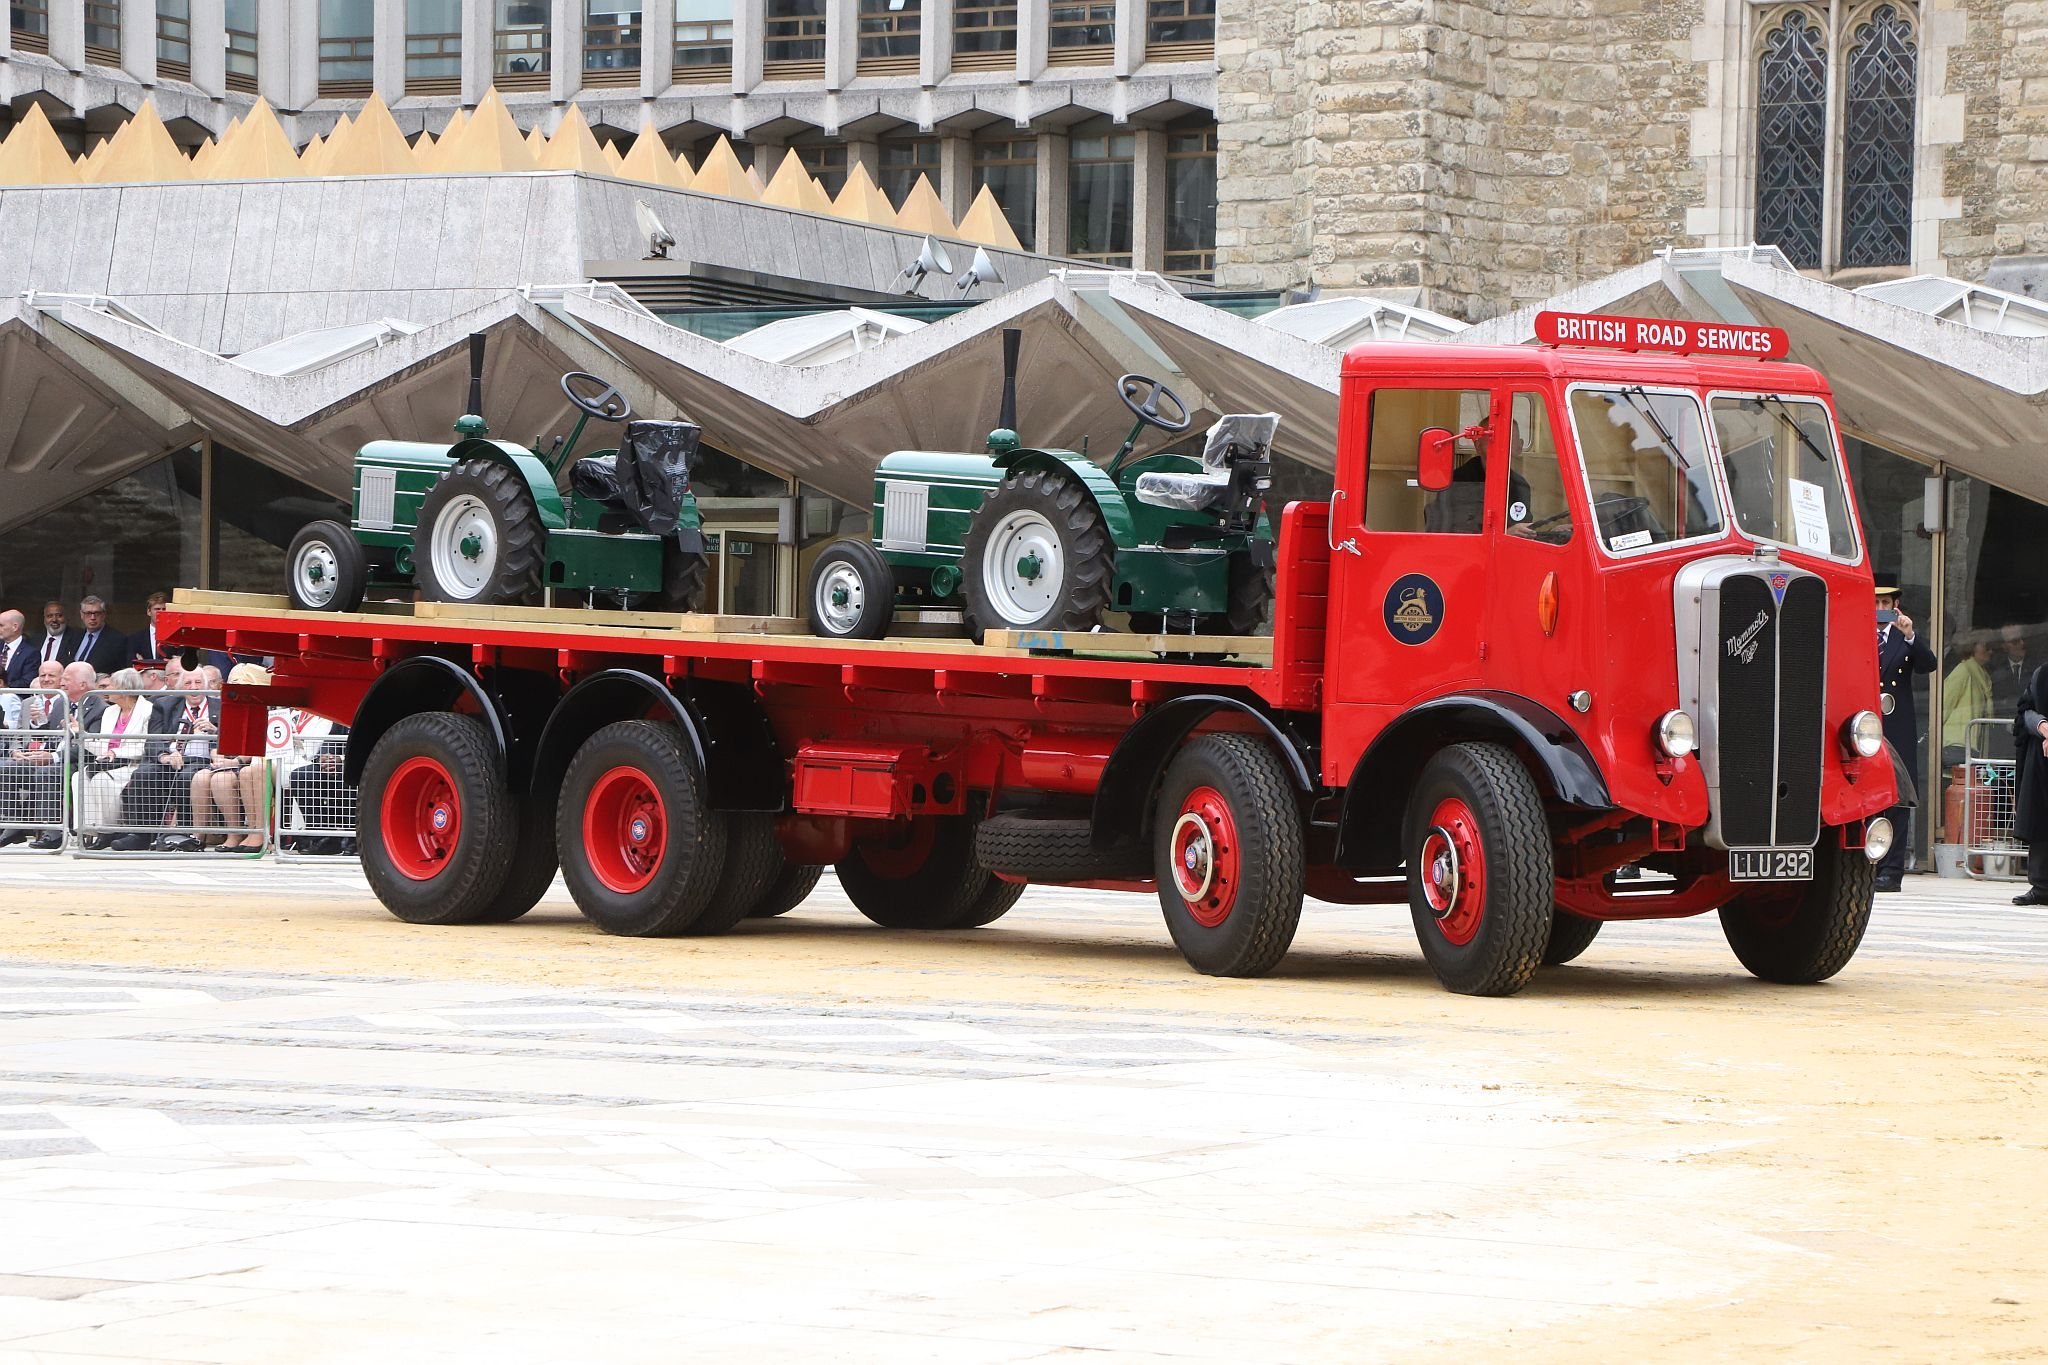 AEC Mammoth Major LLU292. City of London 2023 Cart Marking in Guildhall Yard on 22-Jul-2023. Hosted by the Worshipful Company of Carmen with the Lord Mayor of the City of London in attendance. Wooden plates on the vehicles are branded with hot irons to allow them to ply for trade in the Square Mile. Another of the City Livery Company's annual ceremonies.